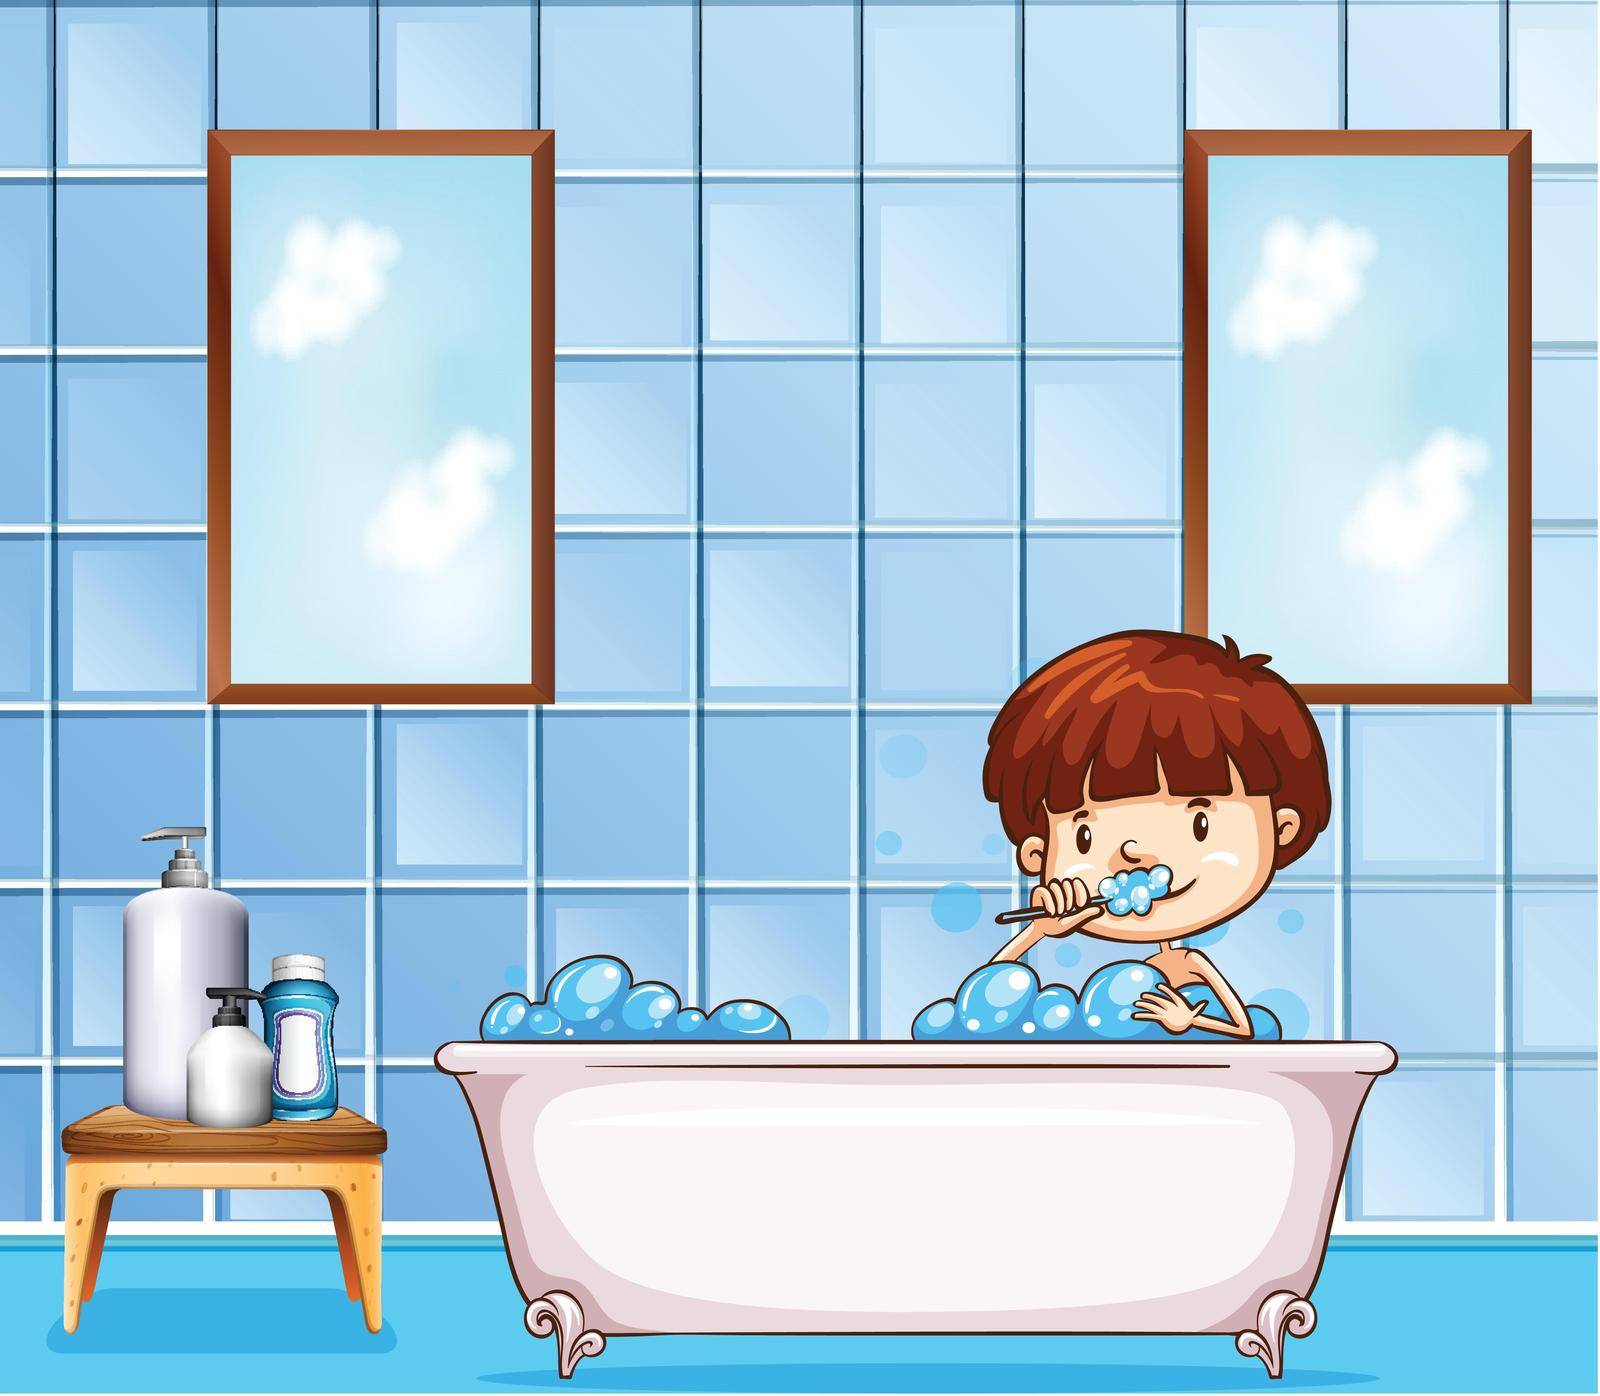 Boy sitting in a bathtub filled with bubbles in a bathroom and brushing his teeth